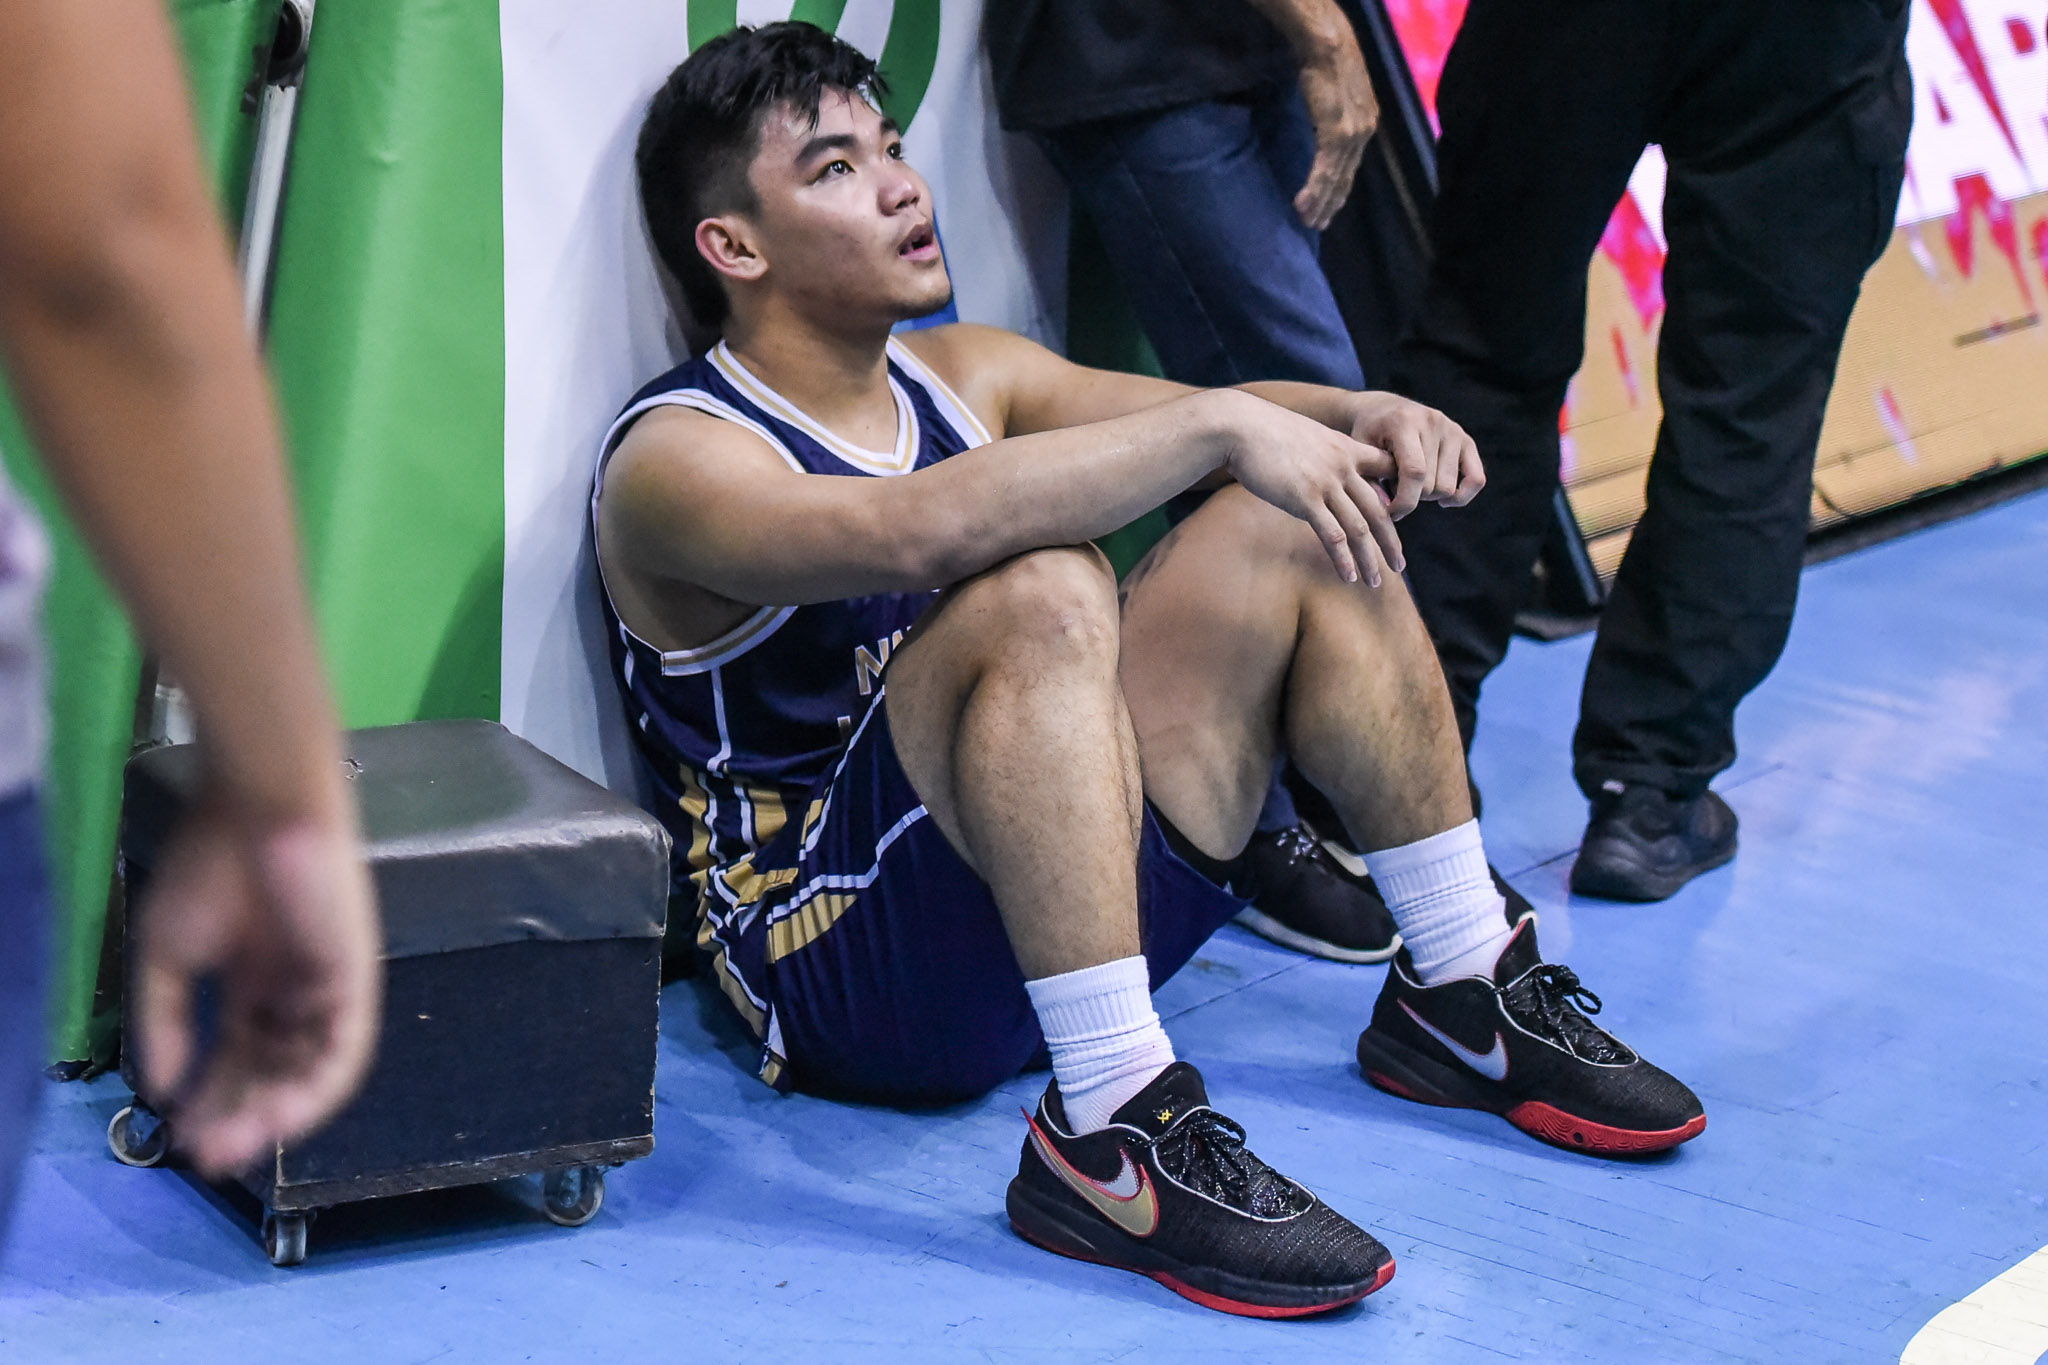 UAAP-85-MBB-F4-UP-vs.-NU-Kean-Baclaan-9411 Best yet to come for Kean Baclaan if he stays with NU, says Napa Basketball News NU UAAP  - philippine sports news